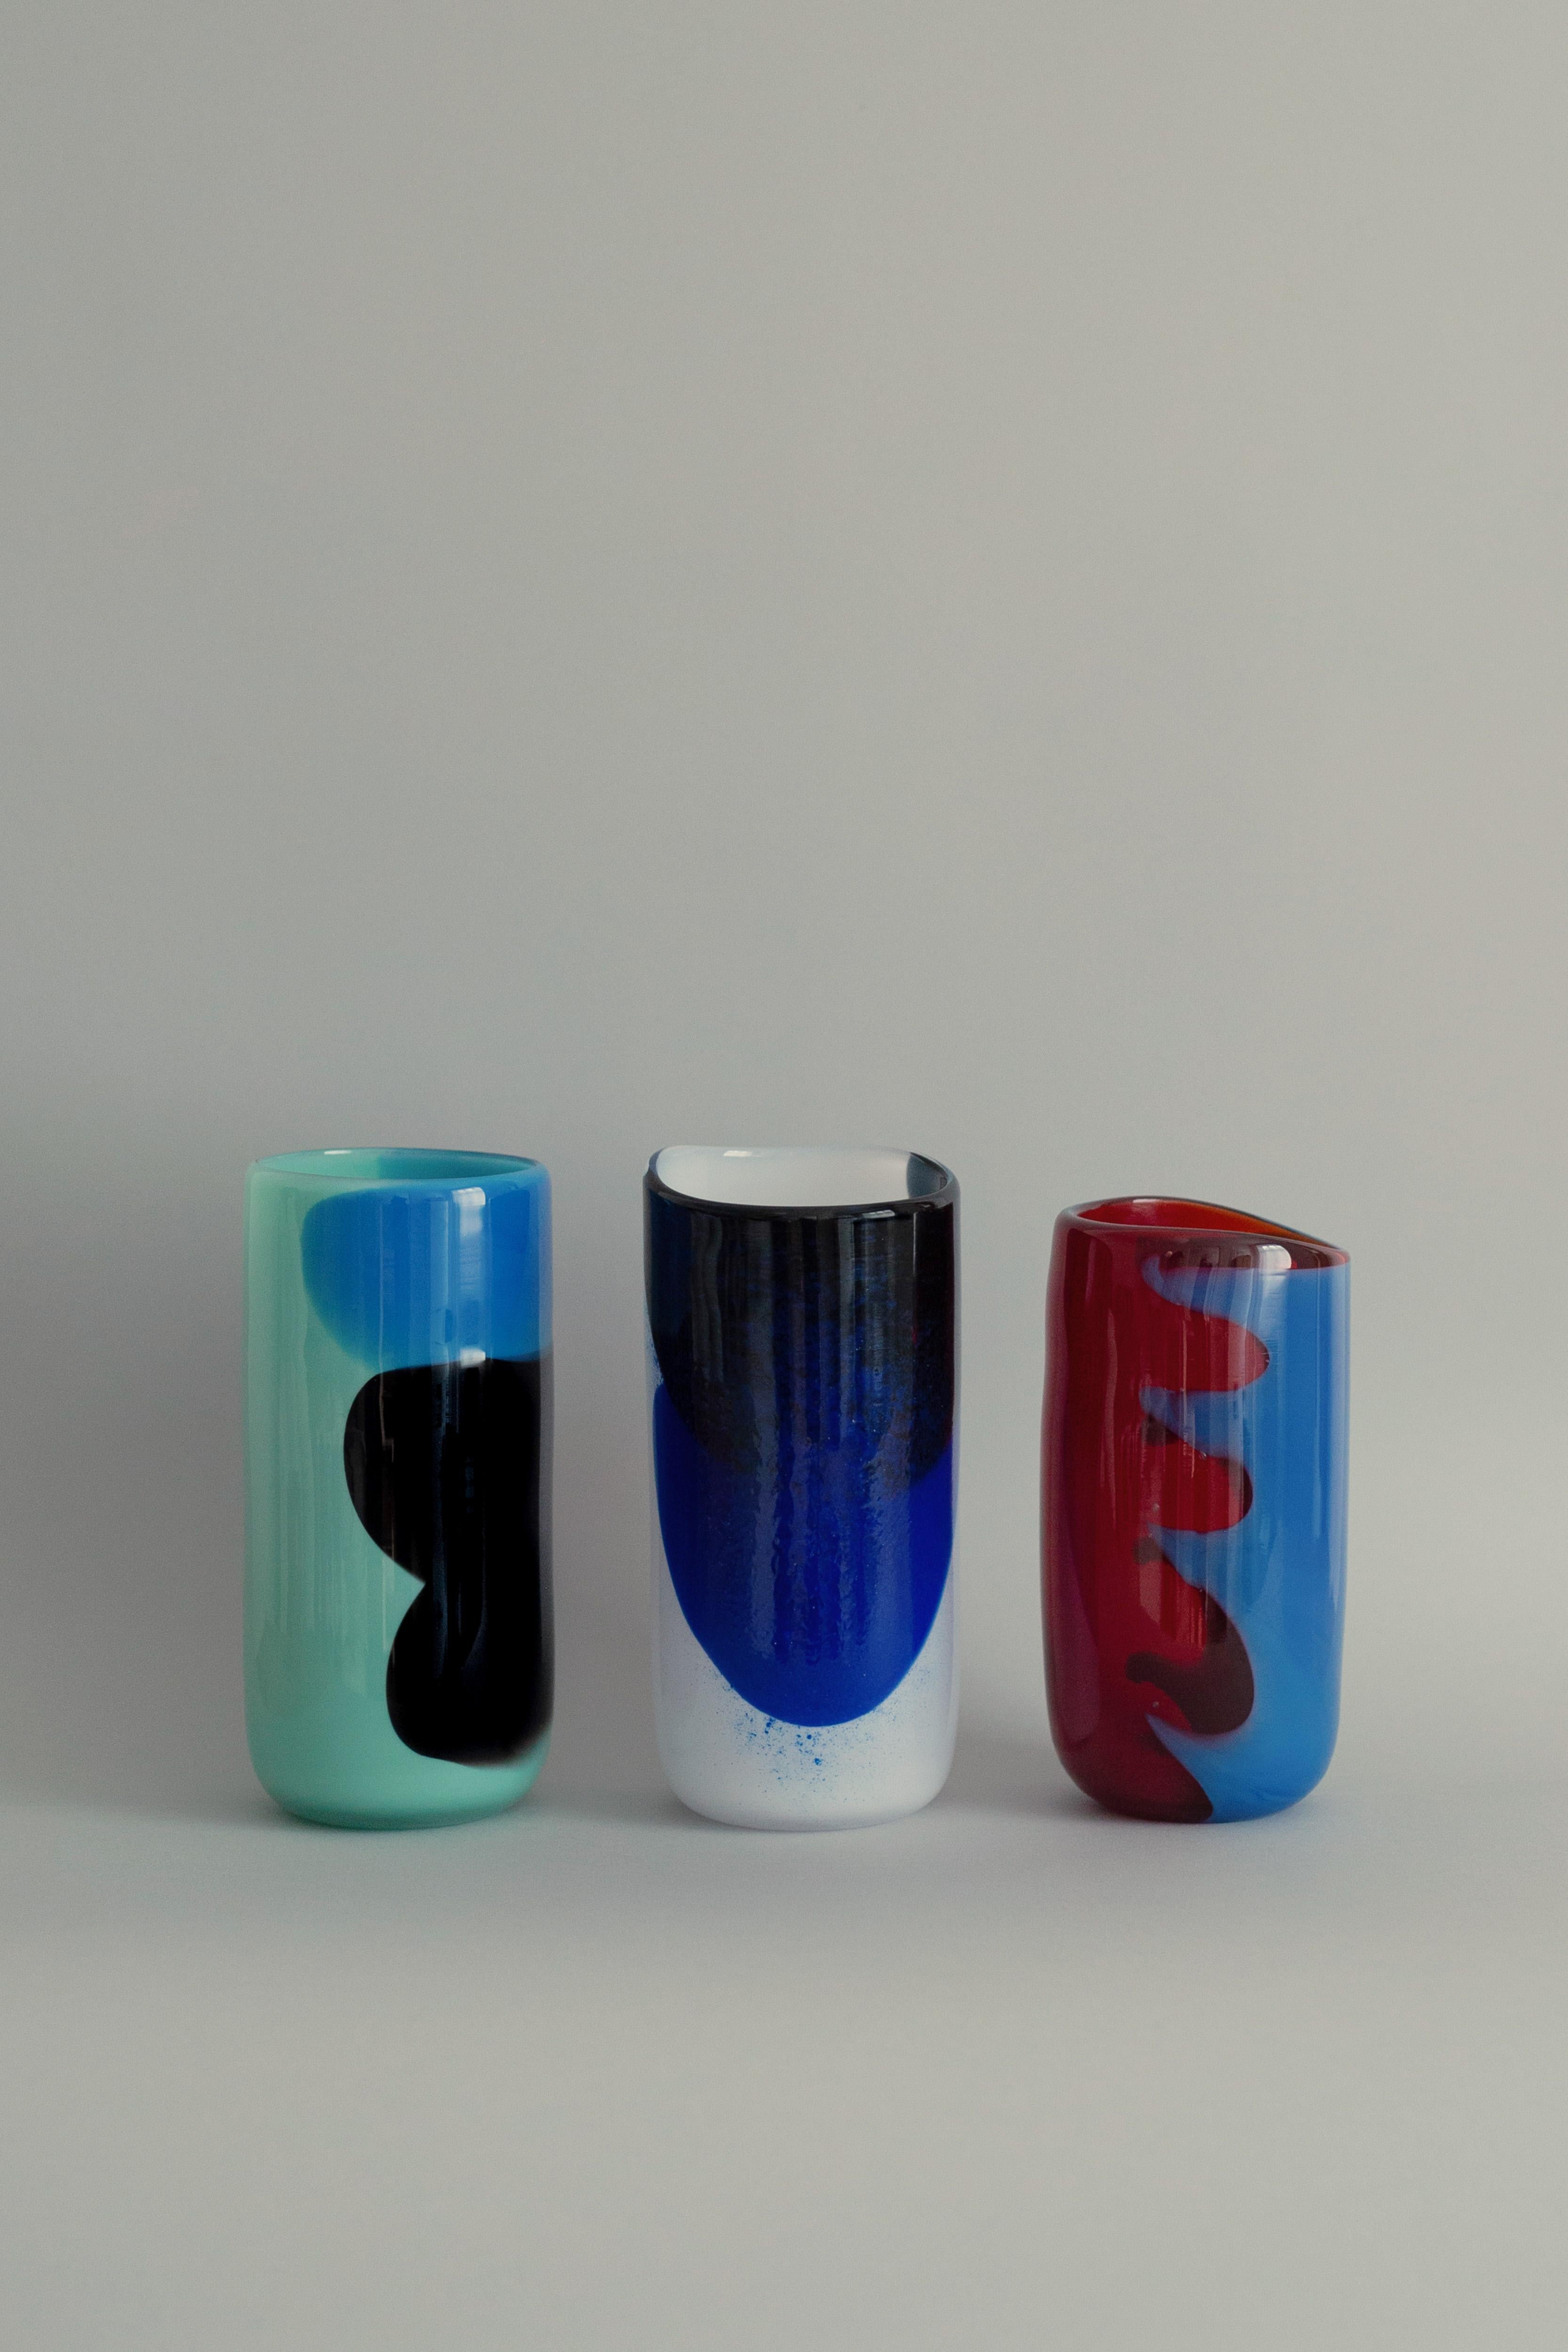 Set of 3 Lightscapes vases by Derya Arpac
Unique pieces
Dimensions: D 10 x H 25 cm
Materials: Glass

Mouth-blown Glass Vases

Derya Arpac is a Copenhagen based architect and furniture designer.
She holds a Master of Arts in Architecture and